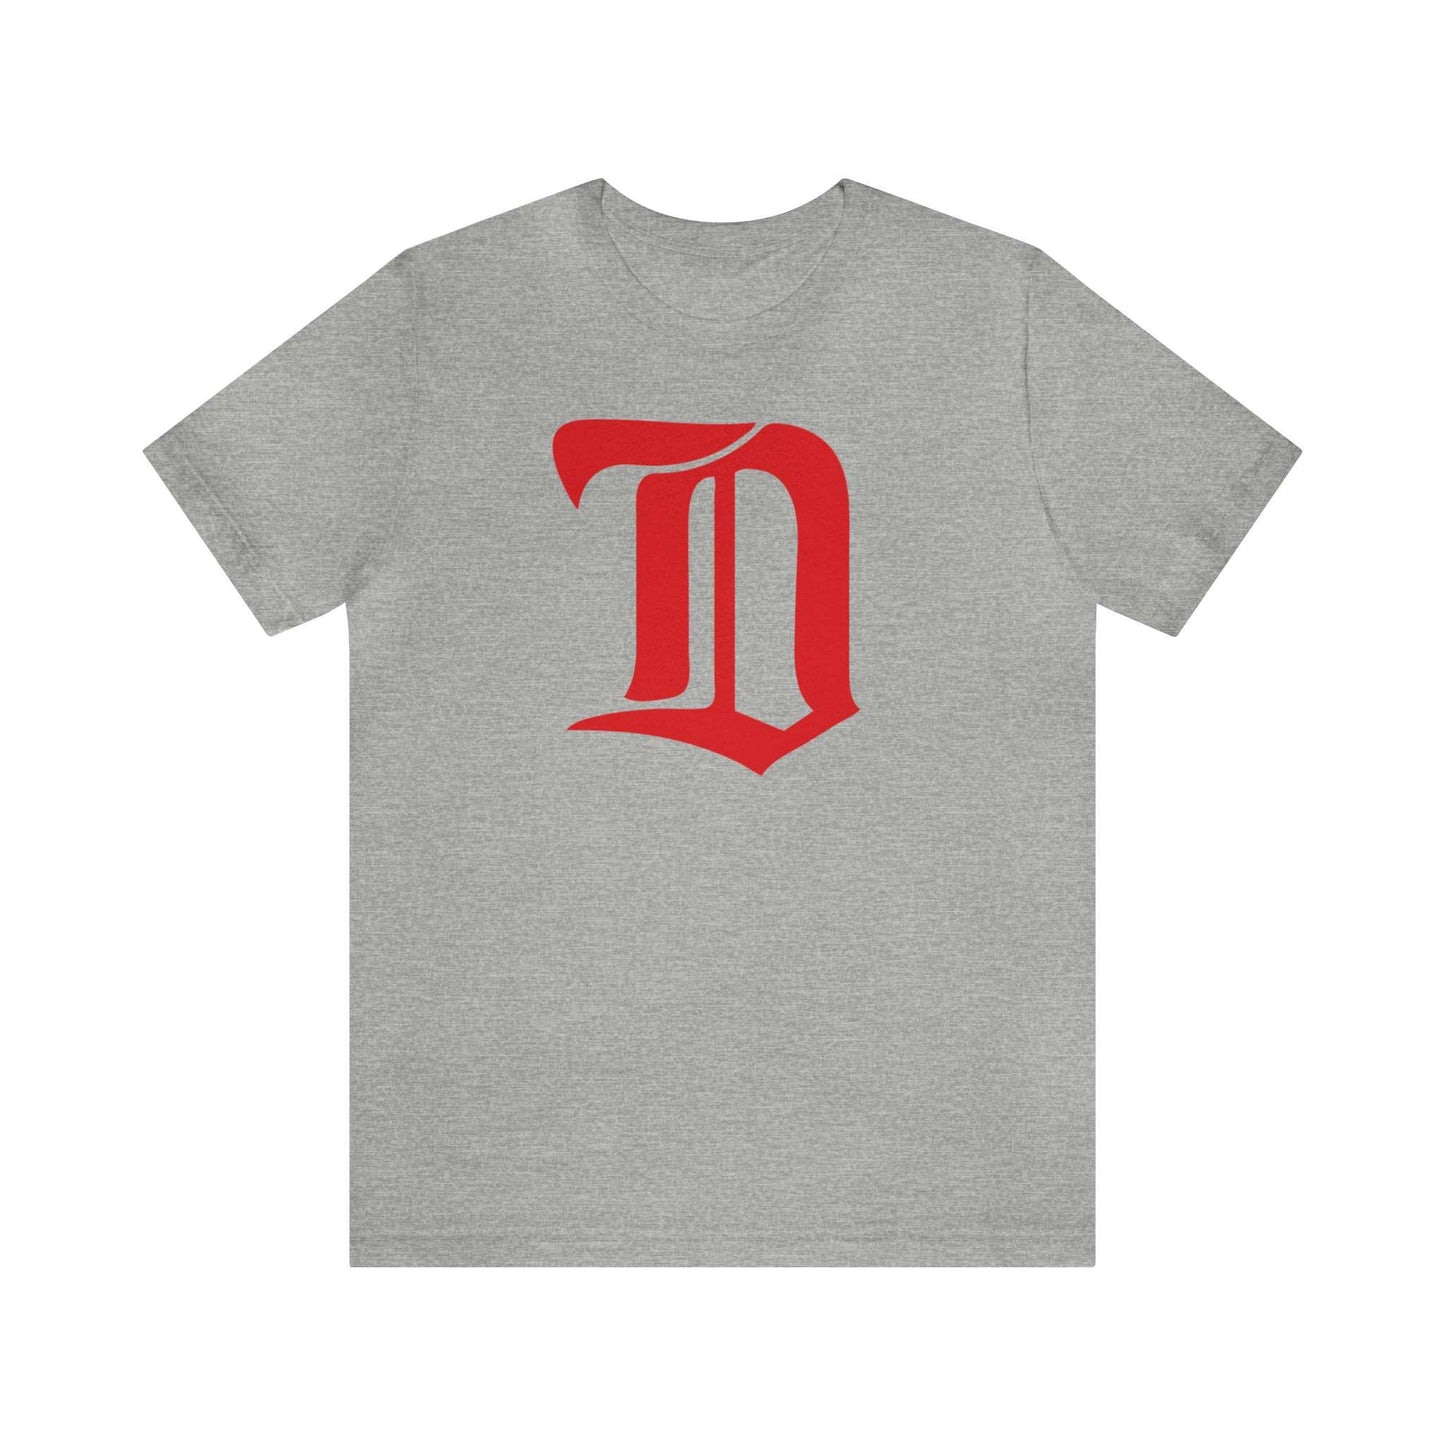 Detroit Cougars Tee